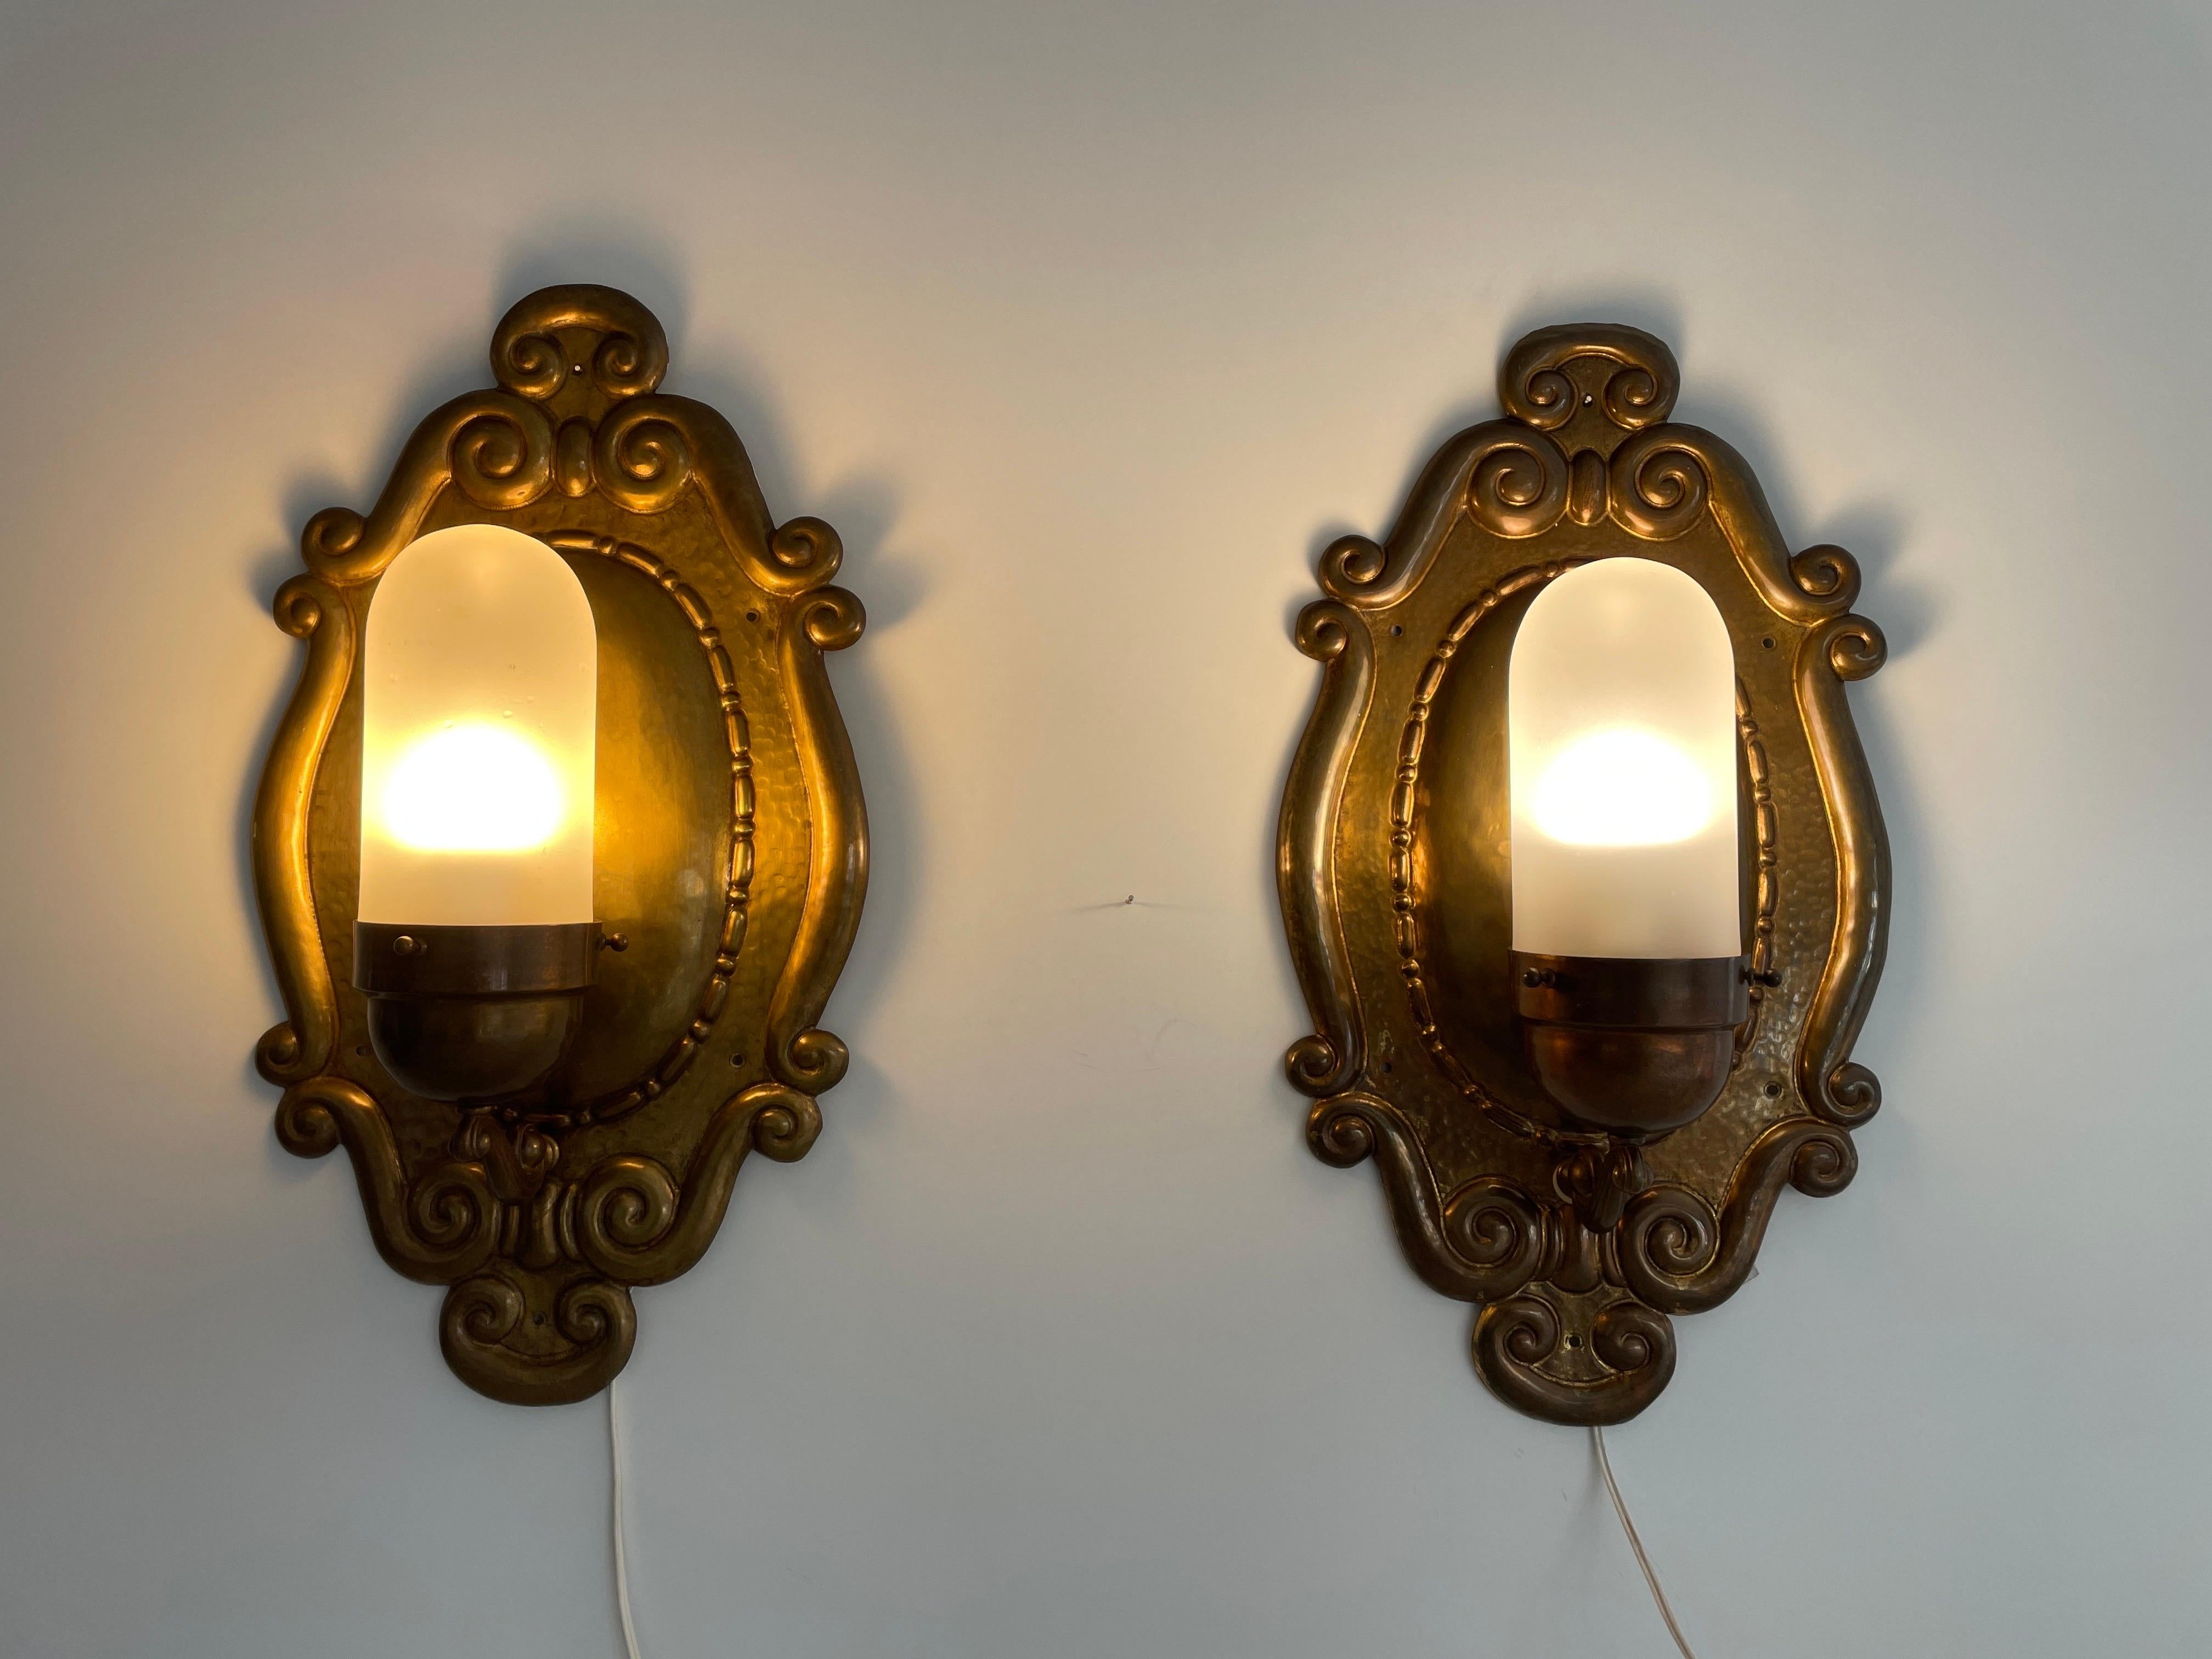 Exceptional Art Deco Glass and Copper Body Pair of Sconces, 1940s, Germany For Sale 3